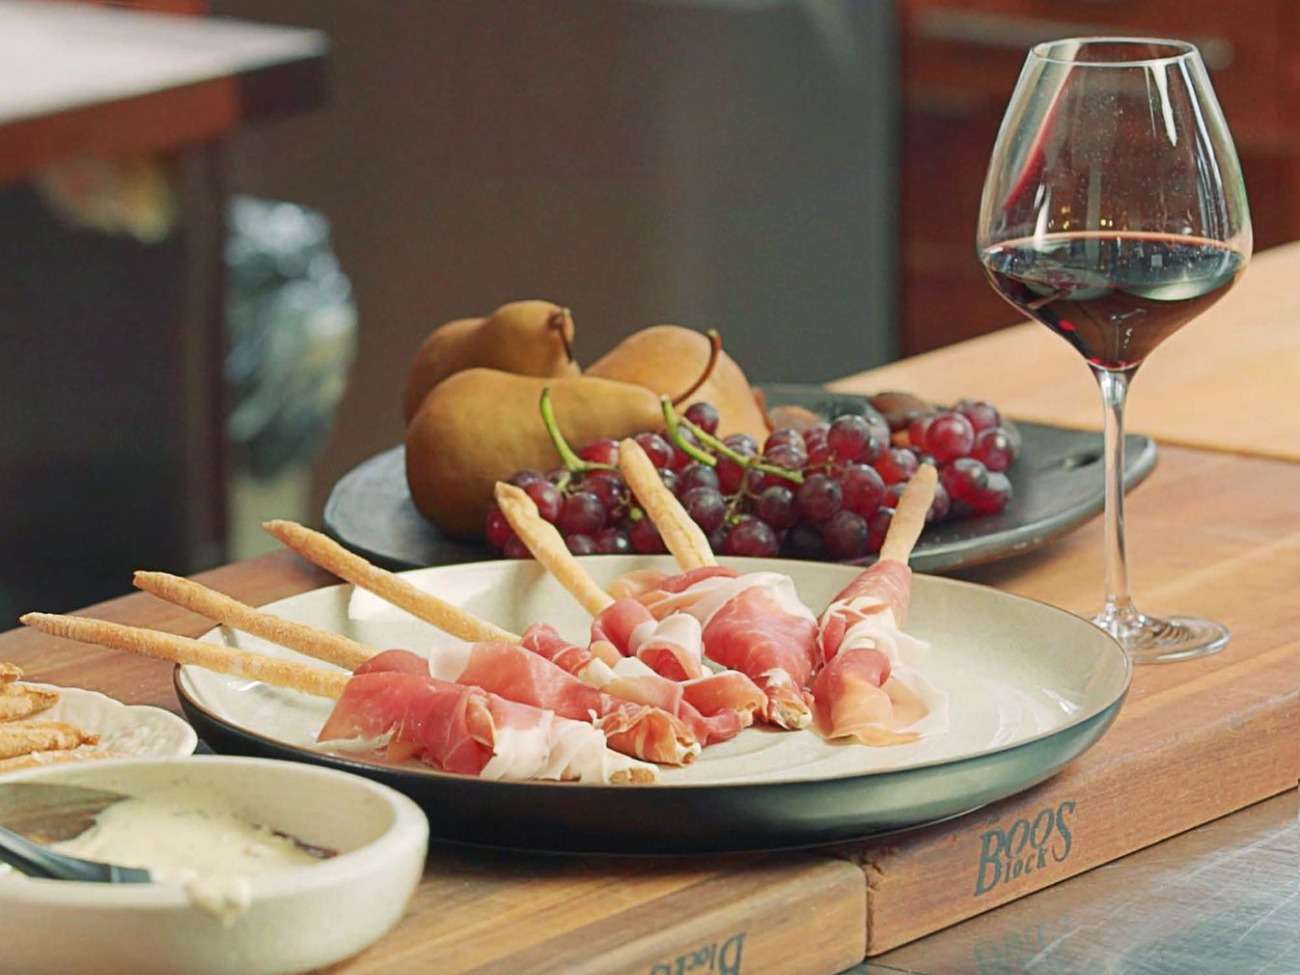 Combine ham and ham with grape and red wine as a finger food